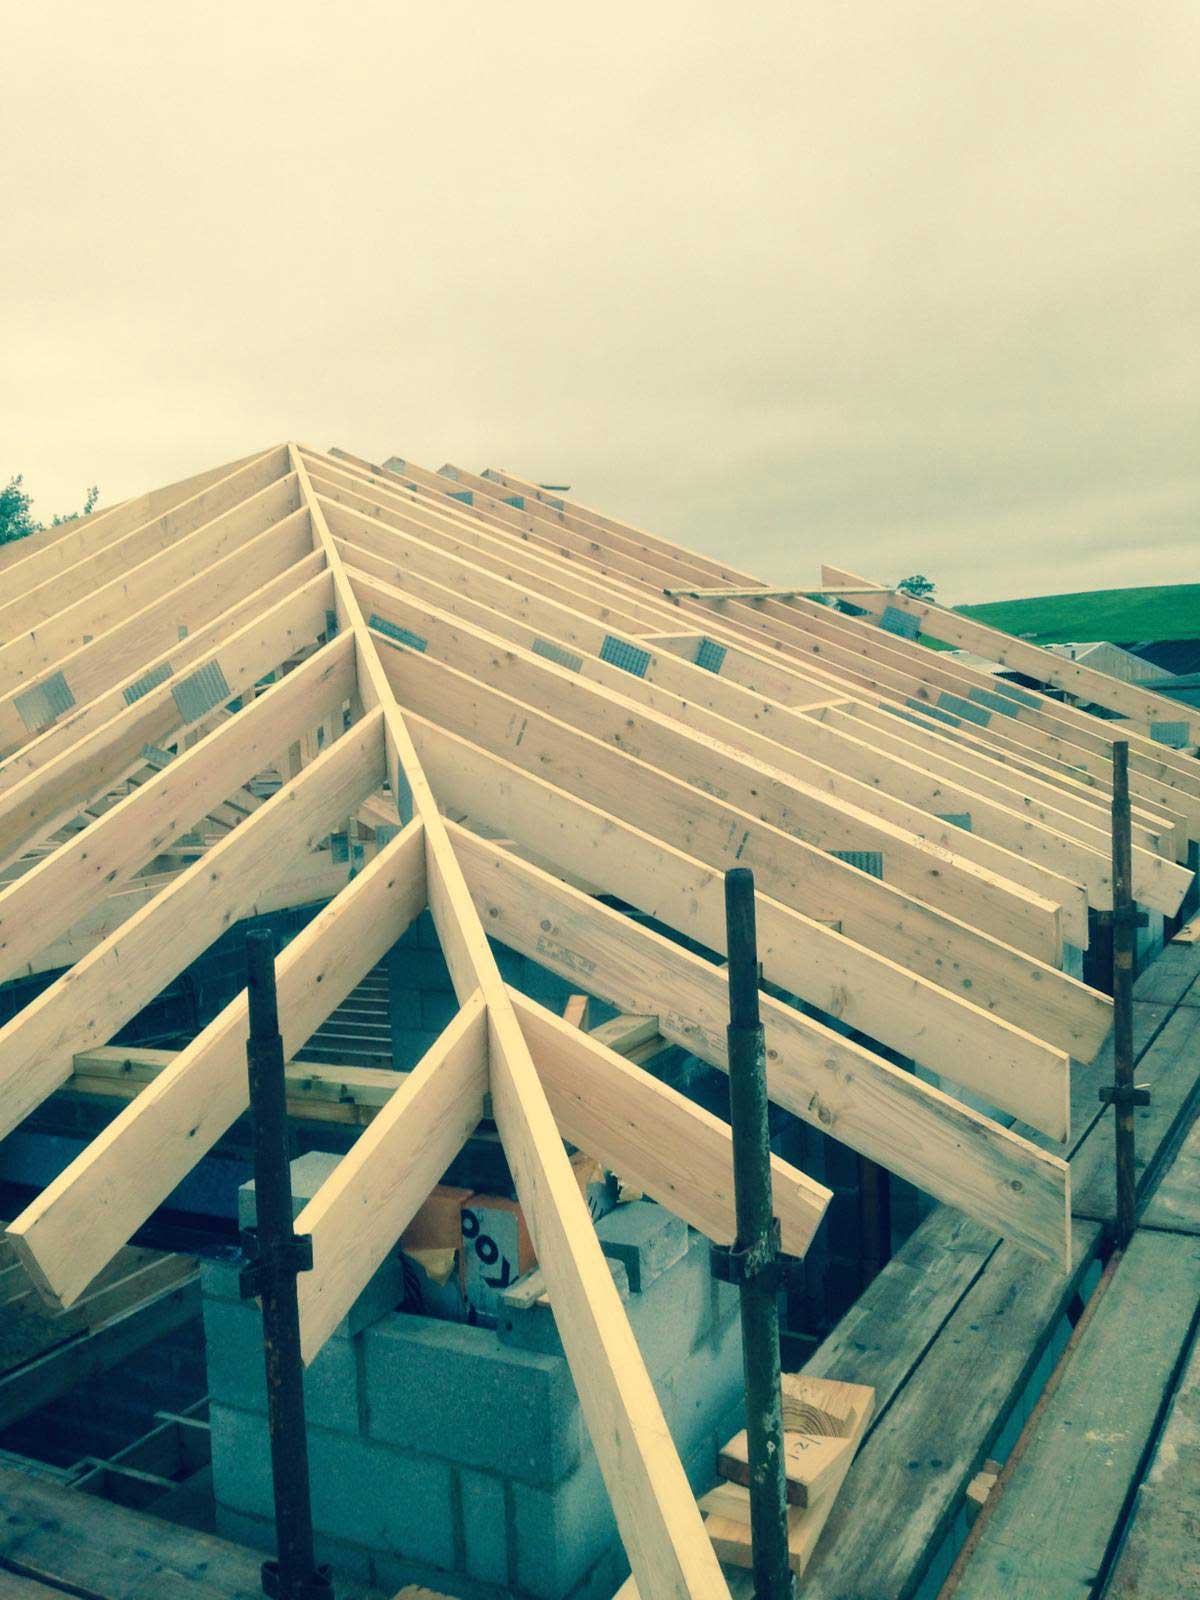 Wooden structures in place on roof ready for repair..